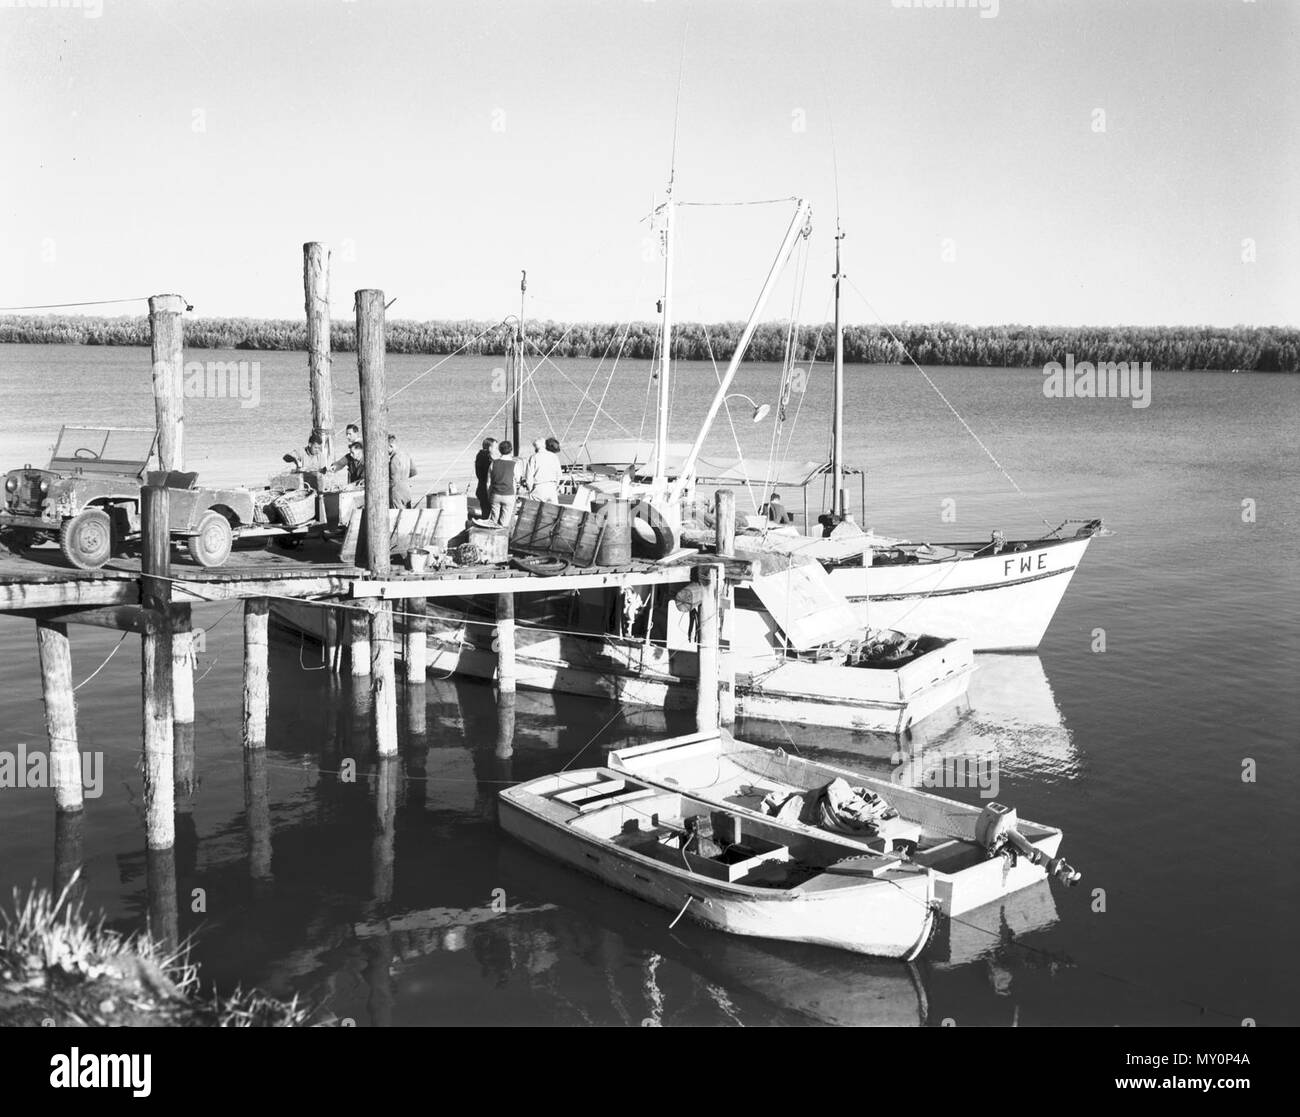 Prawn trawler, Norman River, Karumba, c 1966. When the end of the whaling industry in the early 1960s, the CSIRO suggested the Gulf of Carpentaria could prove to be a good source of prawns. A survey of the Gulf was carried out between July 1963 and August 1965, finding large schools of banana prawns around 32 km offshore. Stock Photo